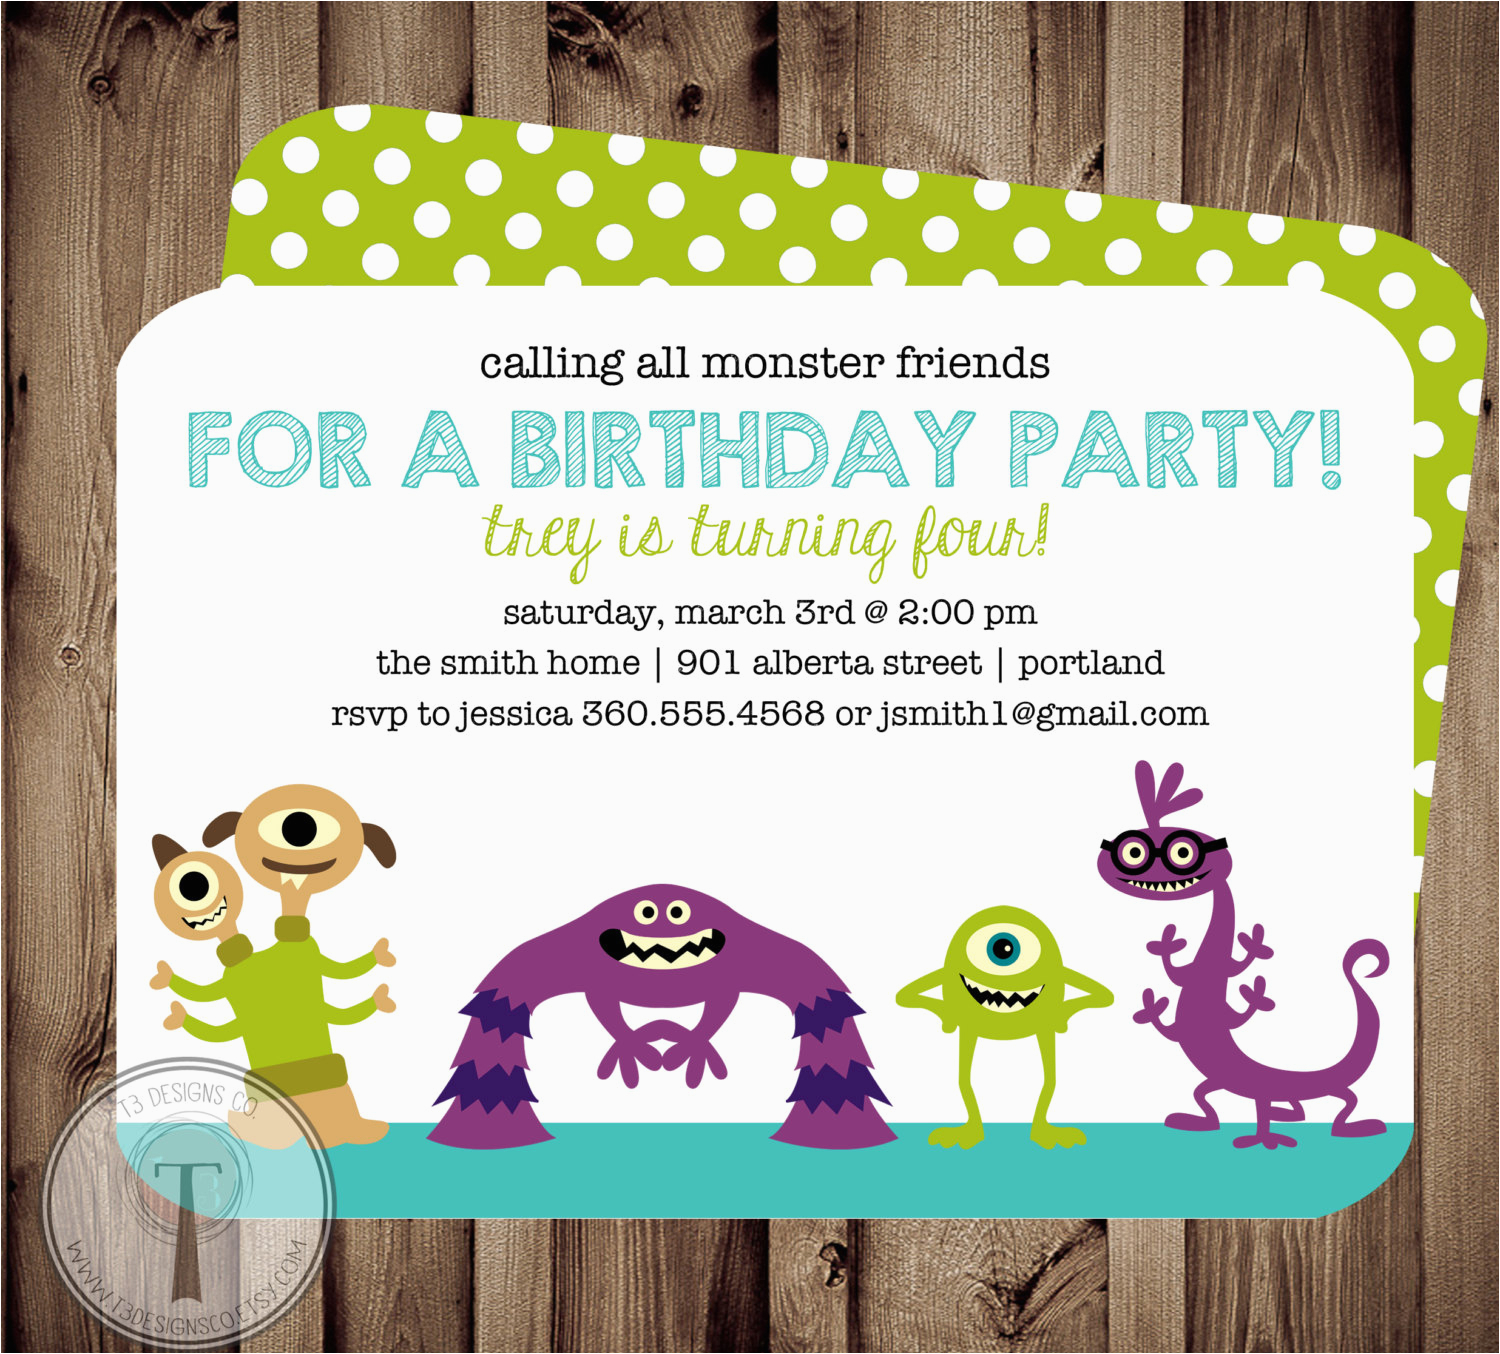 Inviting Friends for Birthday Party Inviting Friends for Birthday Party Invitation Librarry